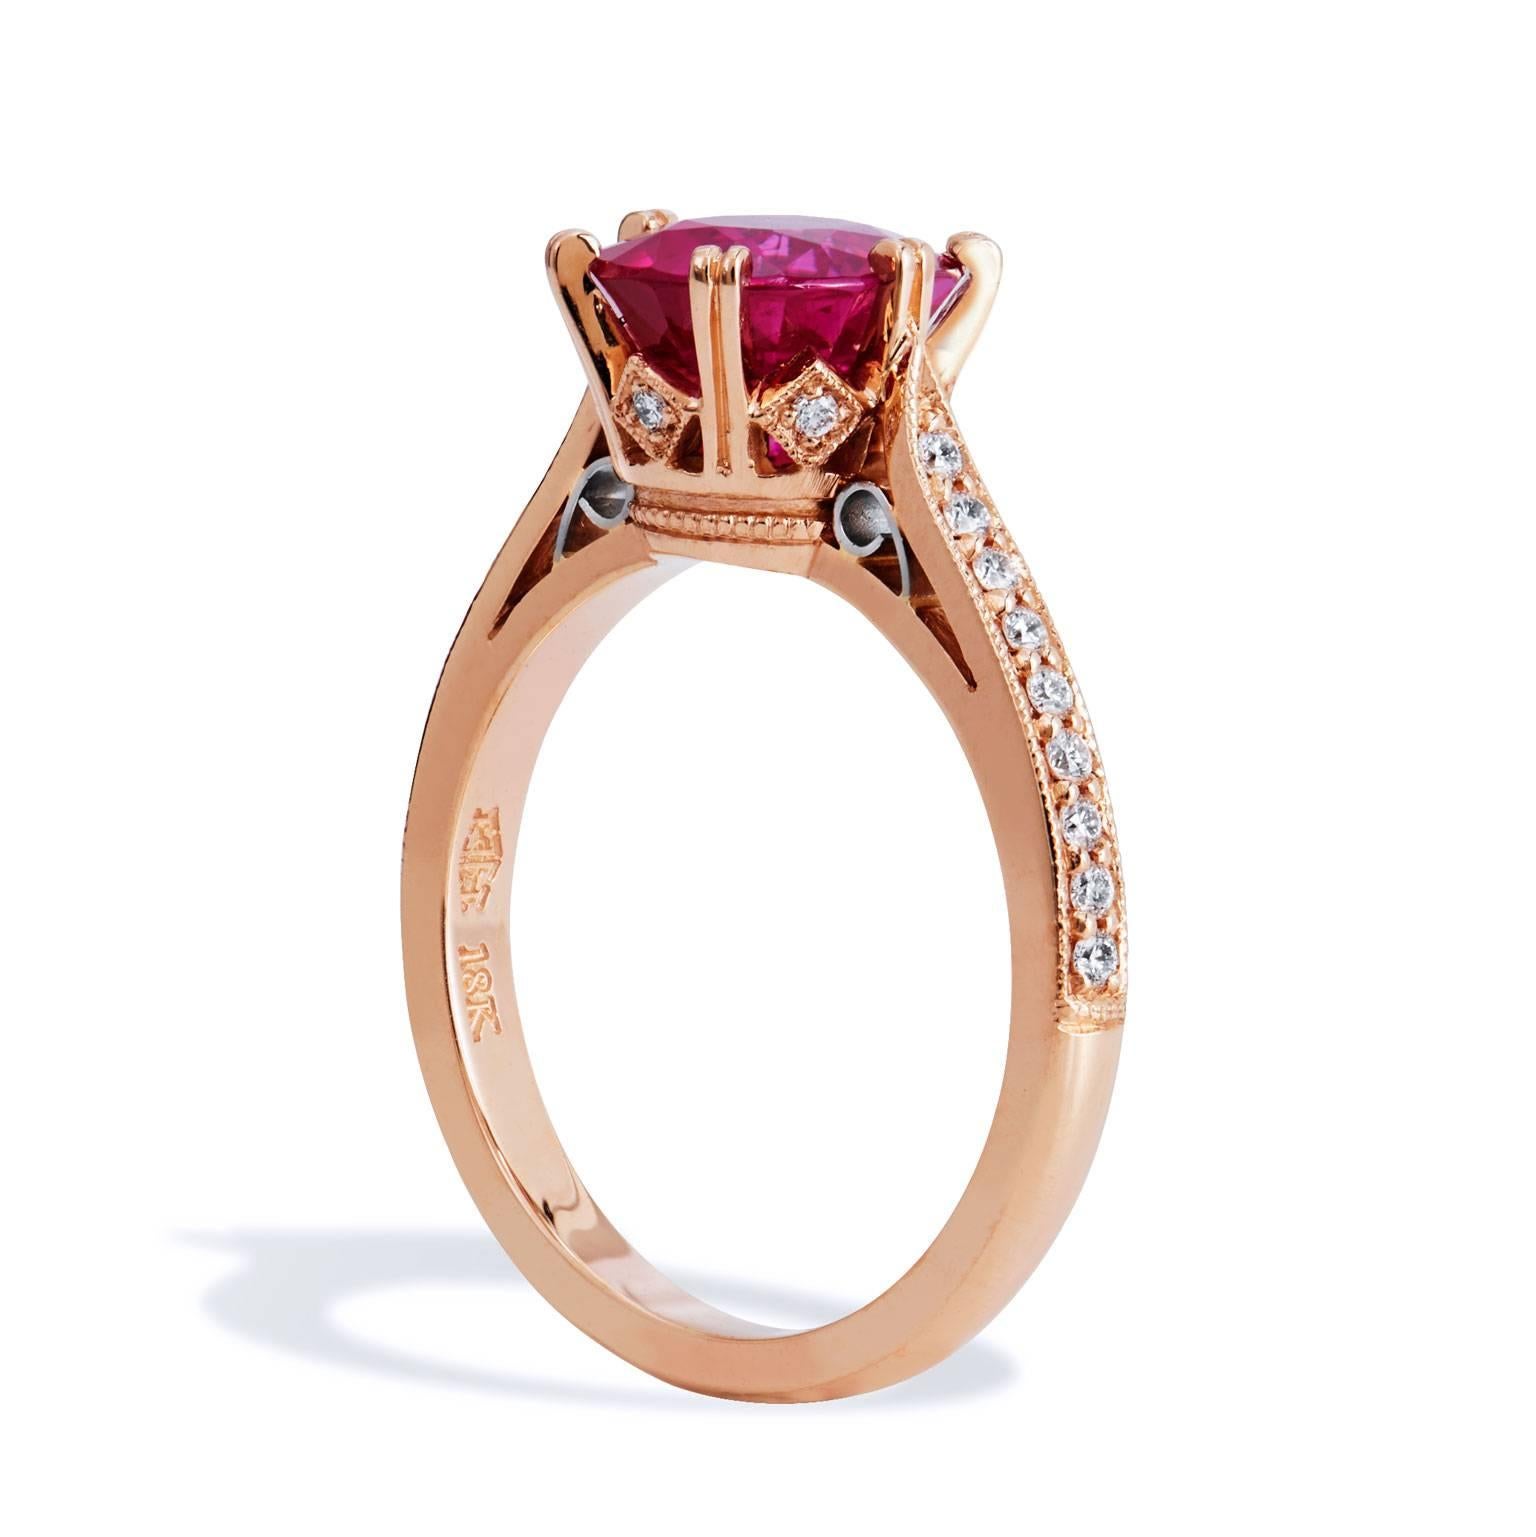 Handmade by H&H Jewels, features 18 karat rose gold as the base for this luscious vivid red Burma ruby and diamond ring. 

The prong-set center ruby is highlighted by 0.13 carat of pave set diamond (F/VS1) trailing down the shank, with an additional